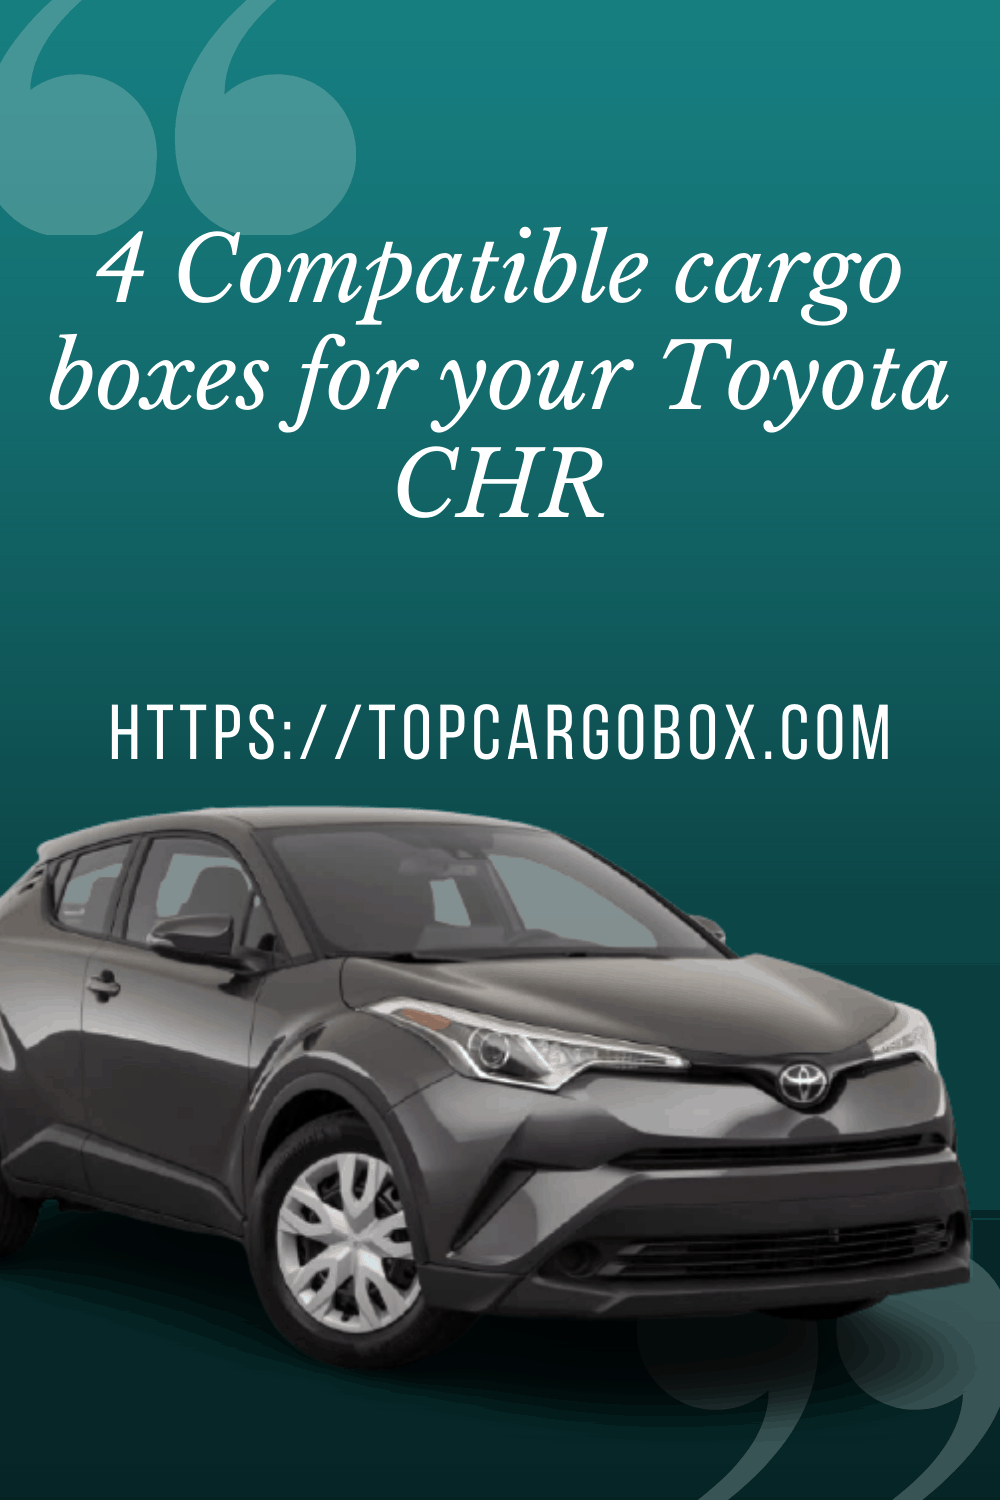 4 best cargo boxes for your toyota C-HR